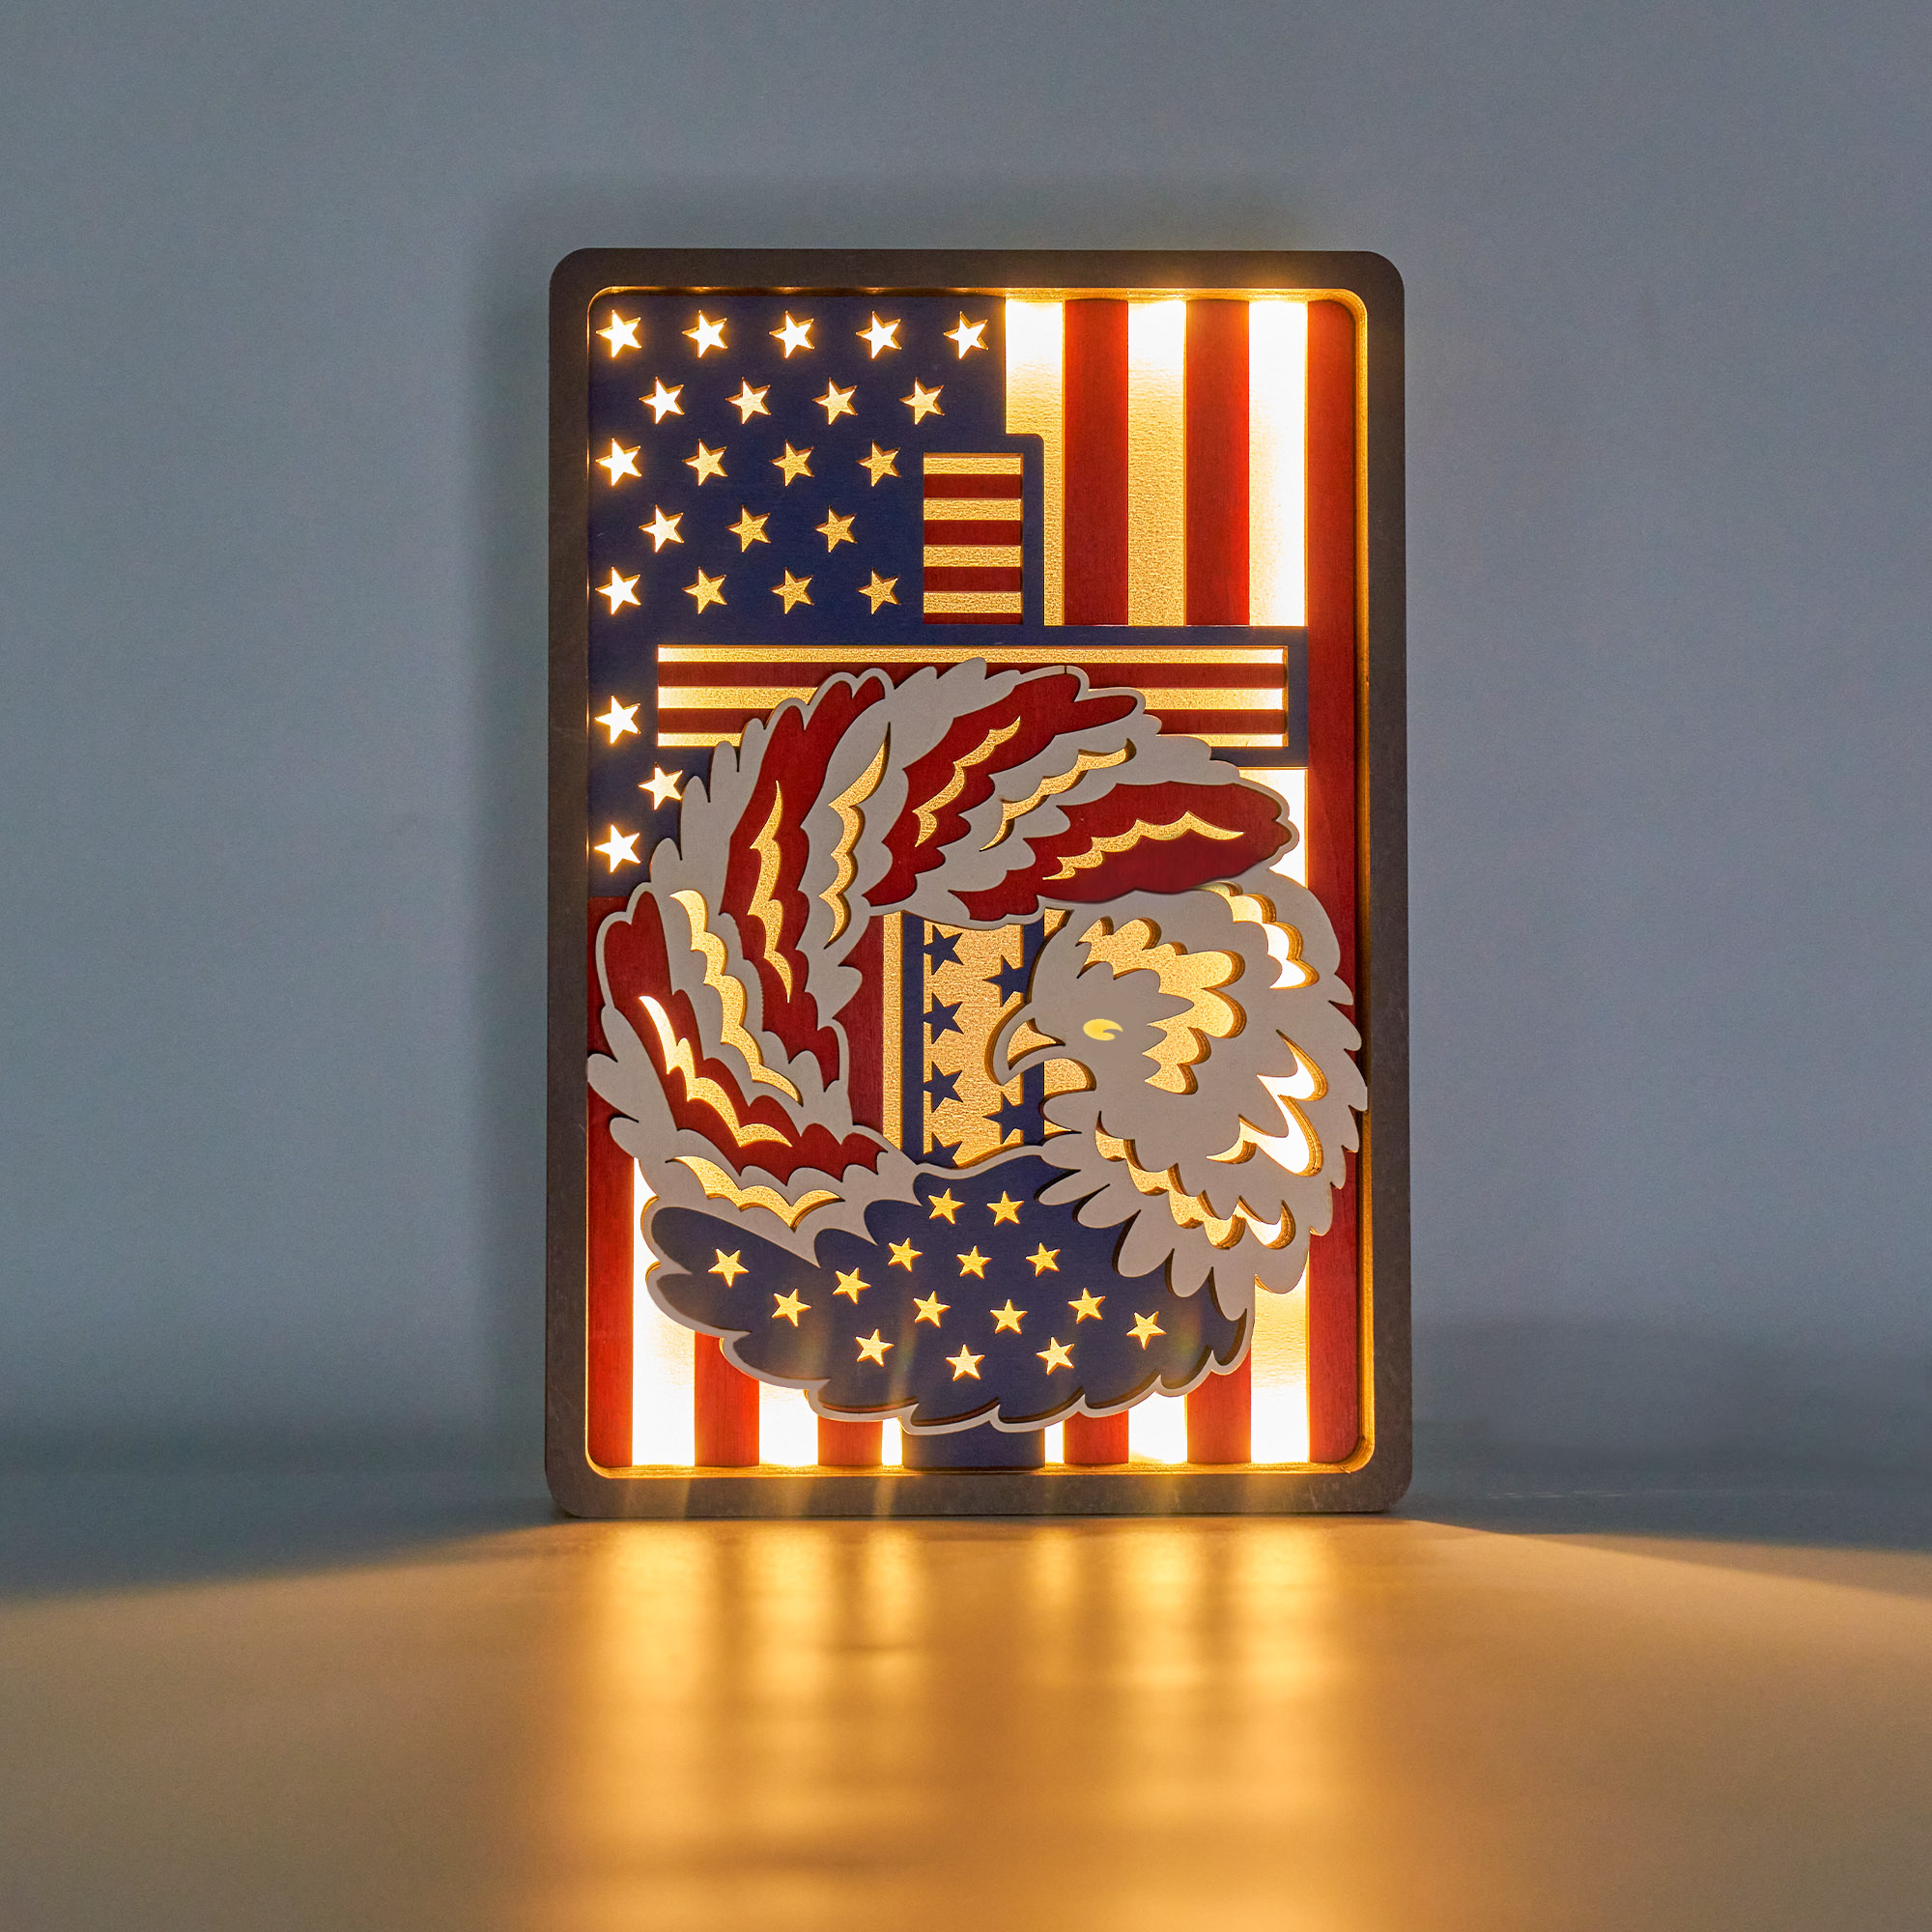 Eagle Wreath of Independence Day LED Wooden Night Light Gift for Festival Home Desktop Decor